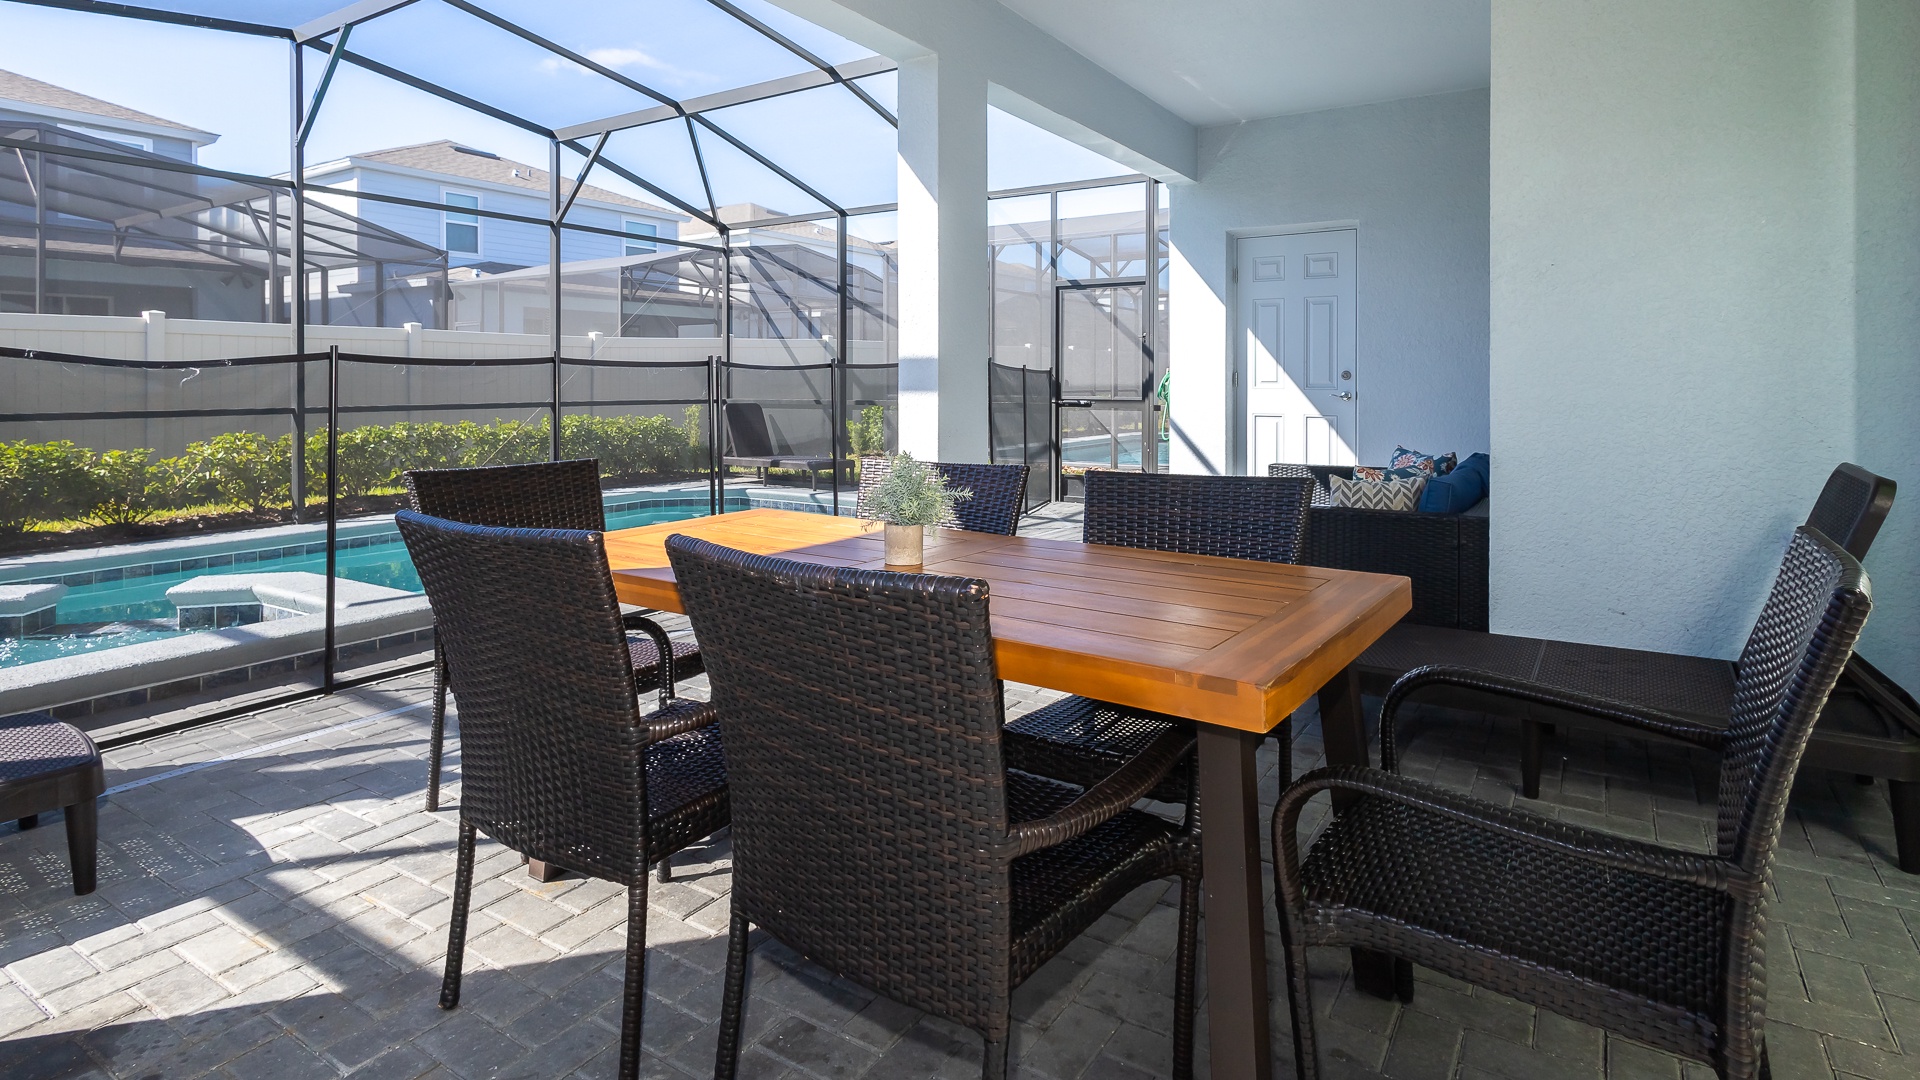 Lounge the day away or enjoy a meal on the covered back patio